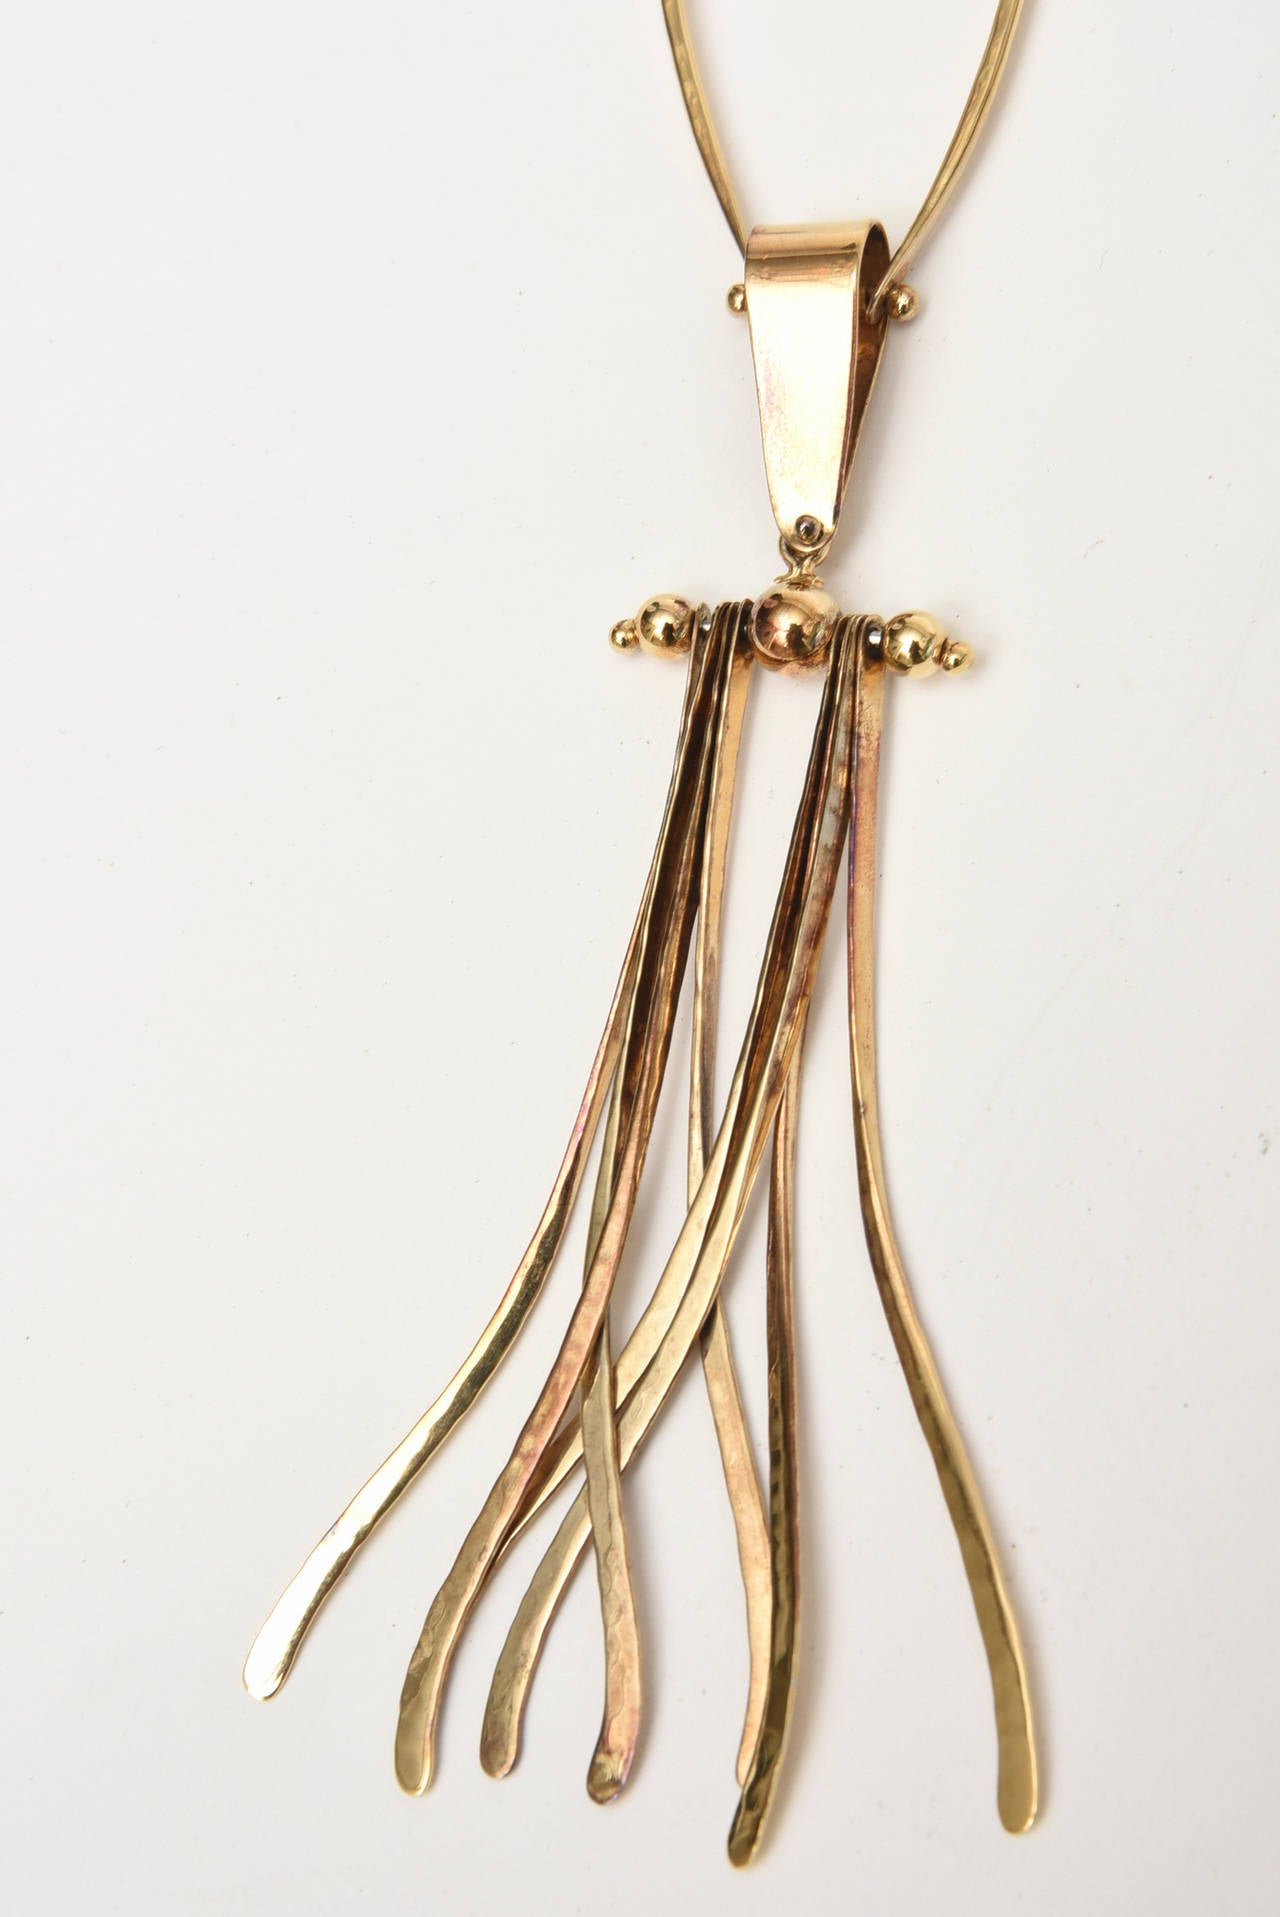 This fabulous one of kind sculptural hand wrought necklace is signed AijeWitt and marked 925 on the back where is meets the chain. It is so modernist. The length is long and this is finely made. It is gold wash over sterling silver. Artisan made.